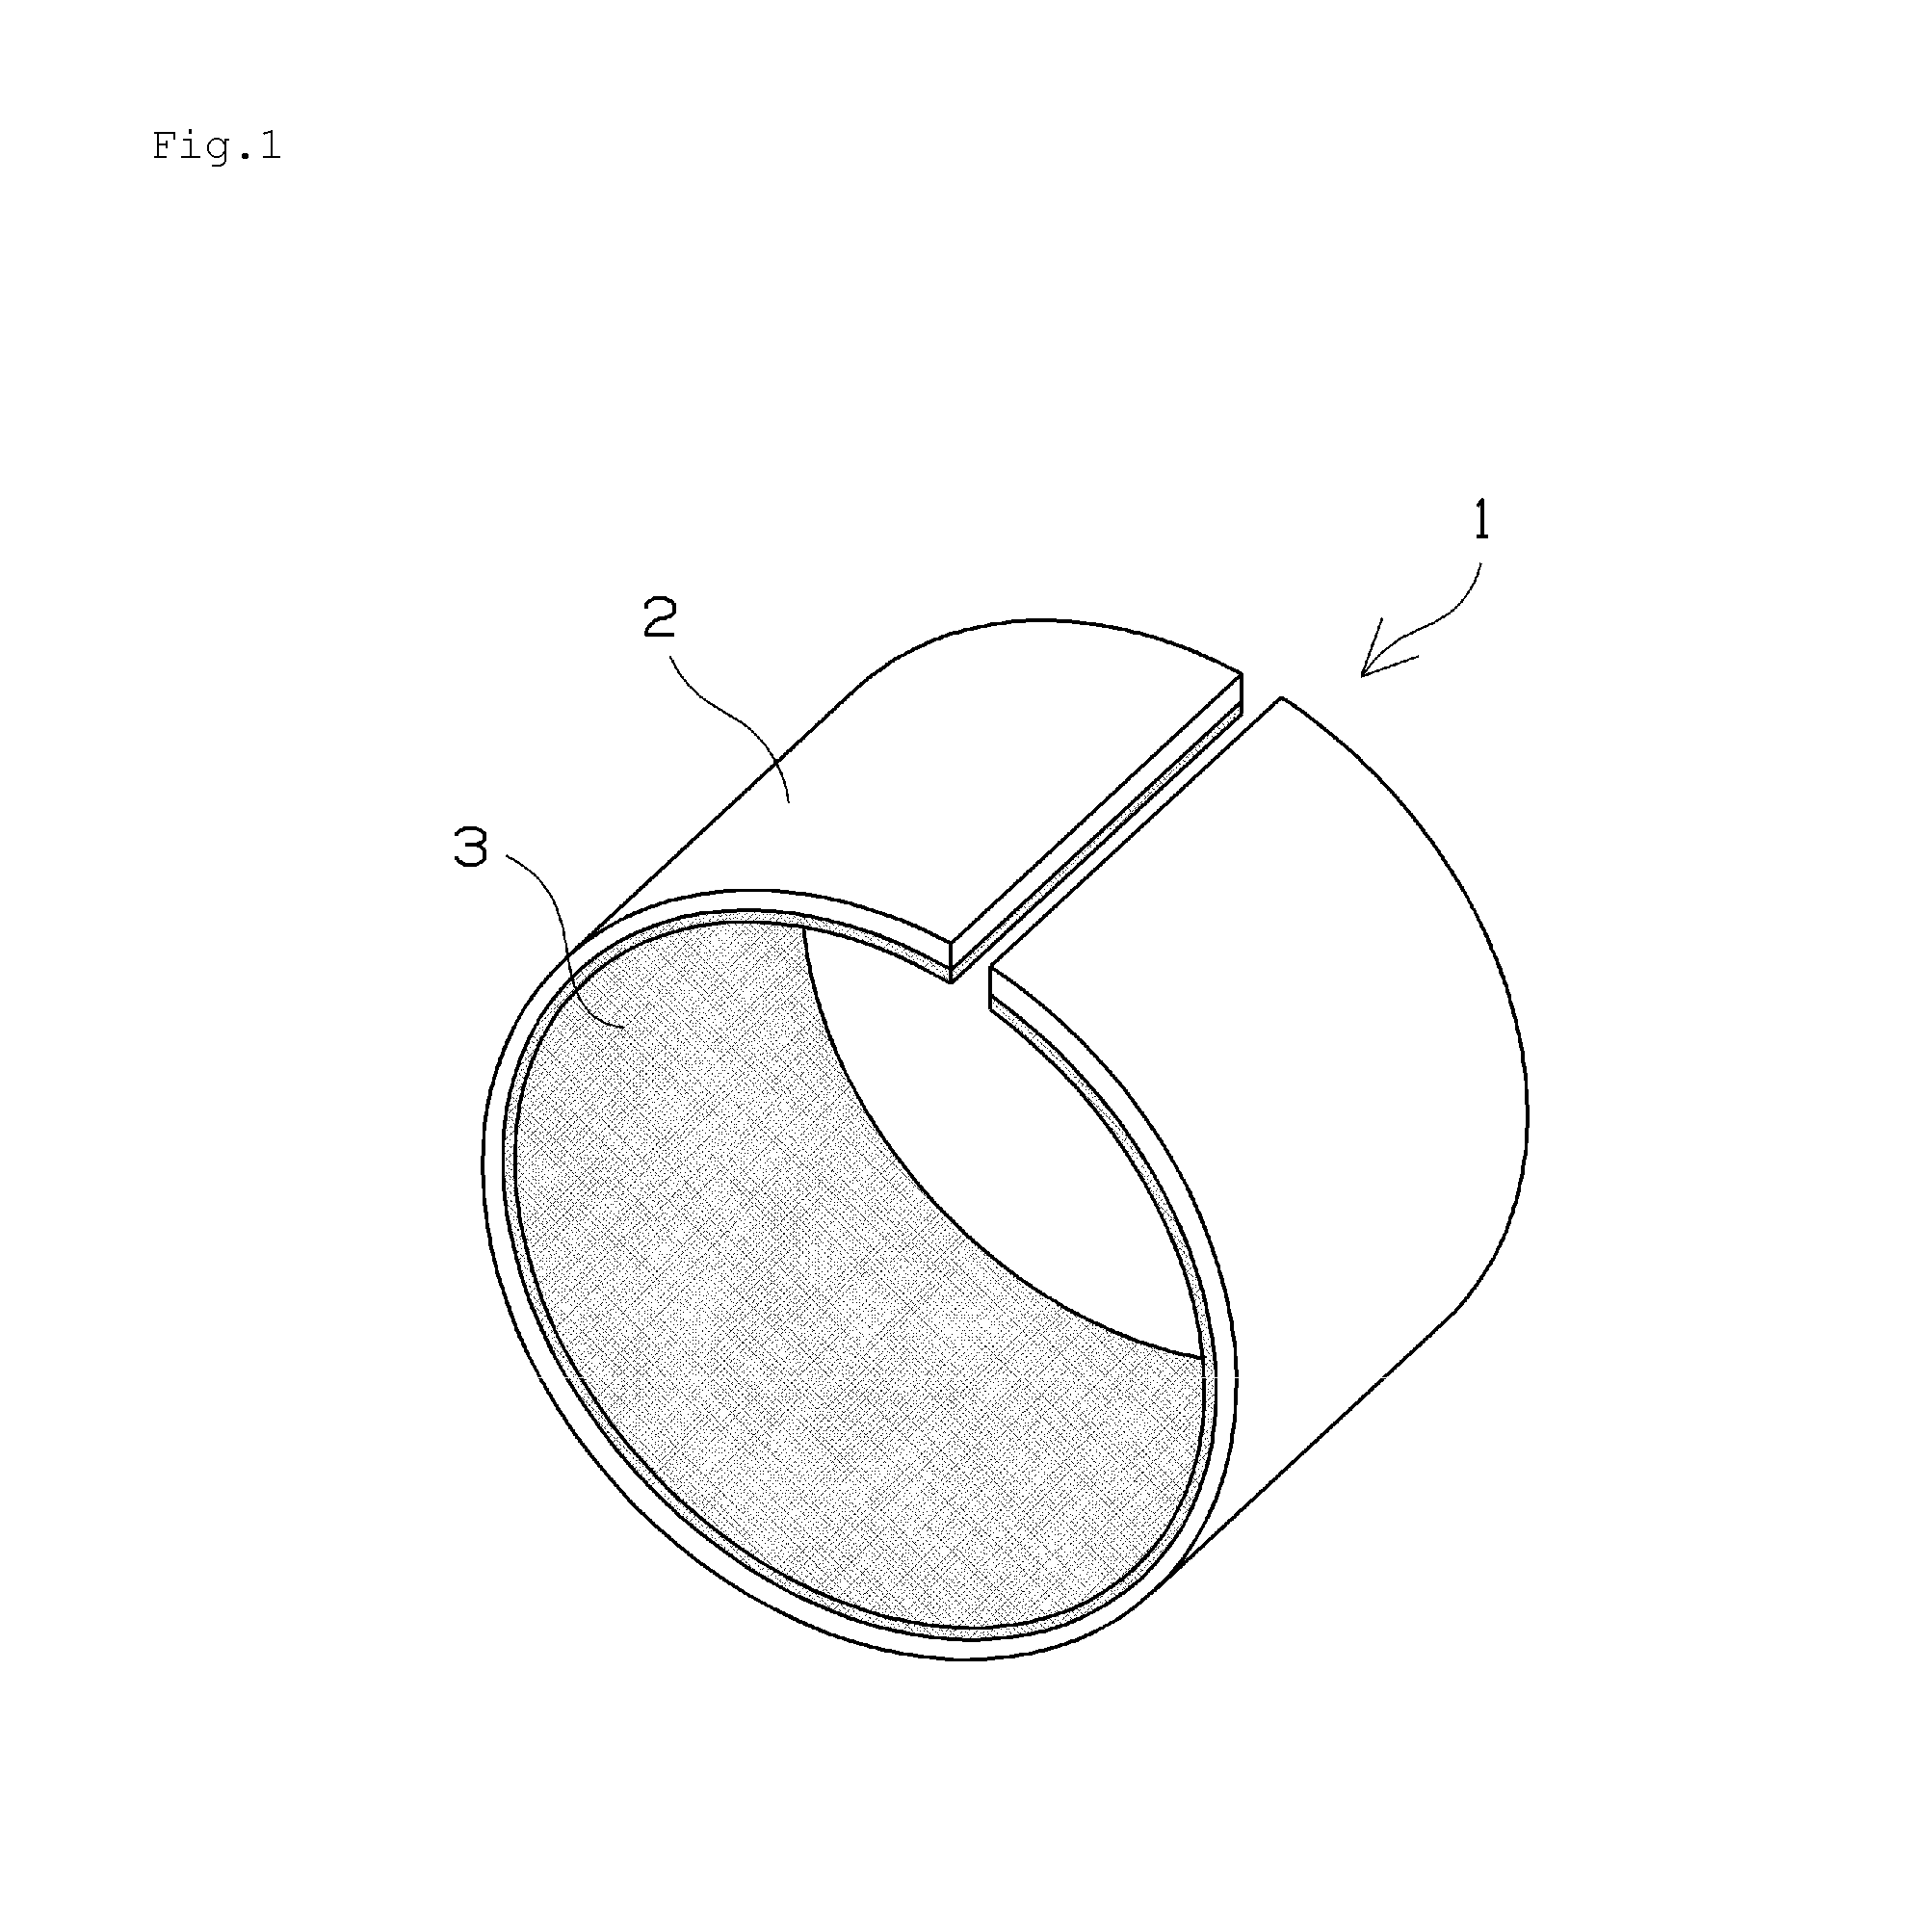 Composite plain bearing, cradle guide, and sliding nut